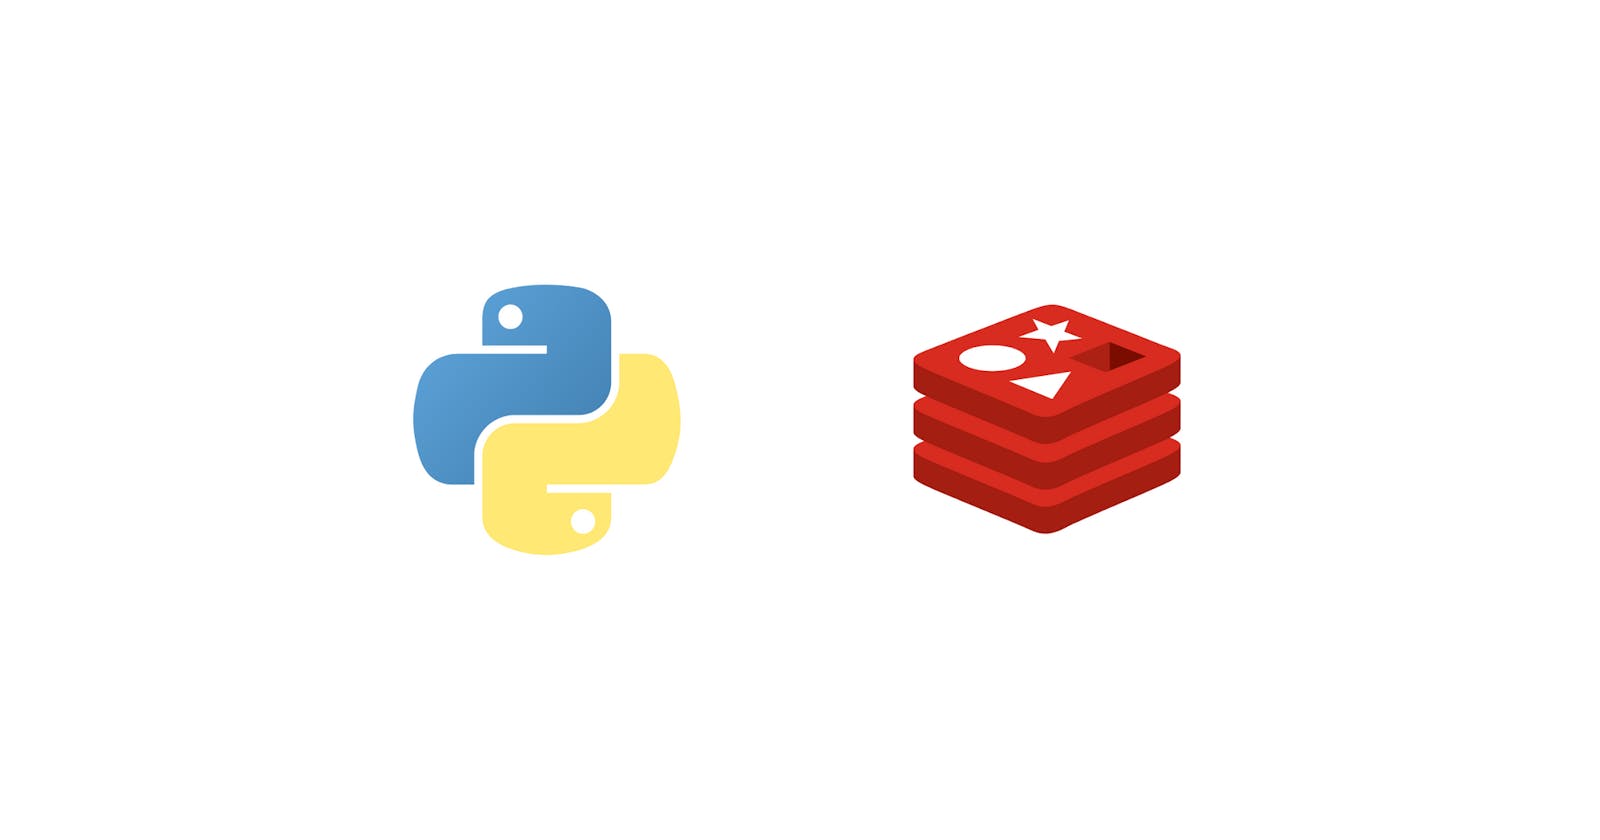 Building a Simple Voting Application with Redis using Python